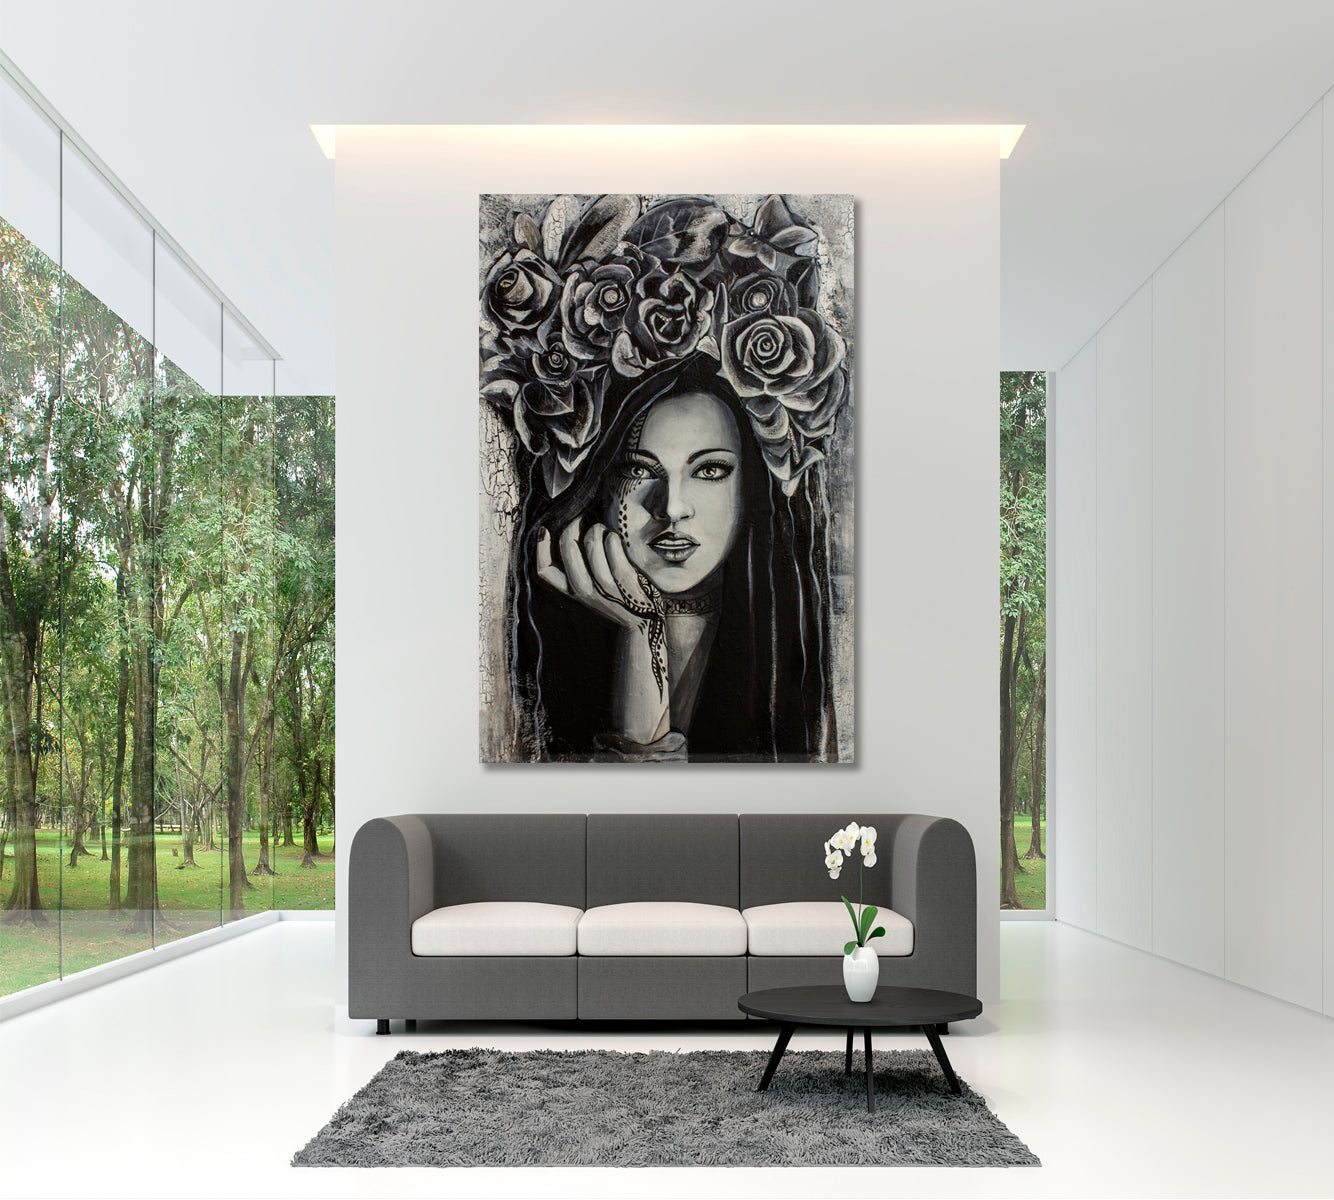 GIRL WITH CROW FLOWERS Beautiful Woman - Vertical 1 panel Black and White Wall Art Print Artesty 1 Panel 16"x24" 